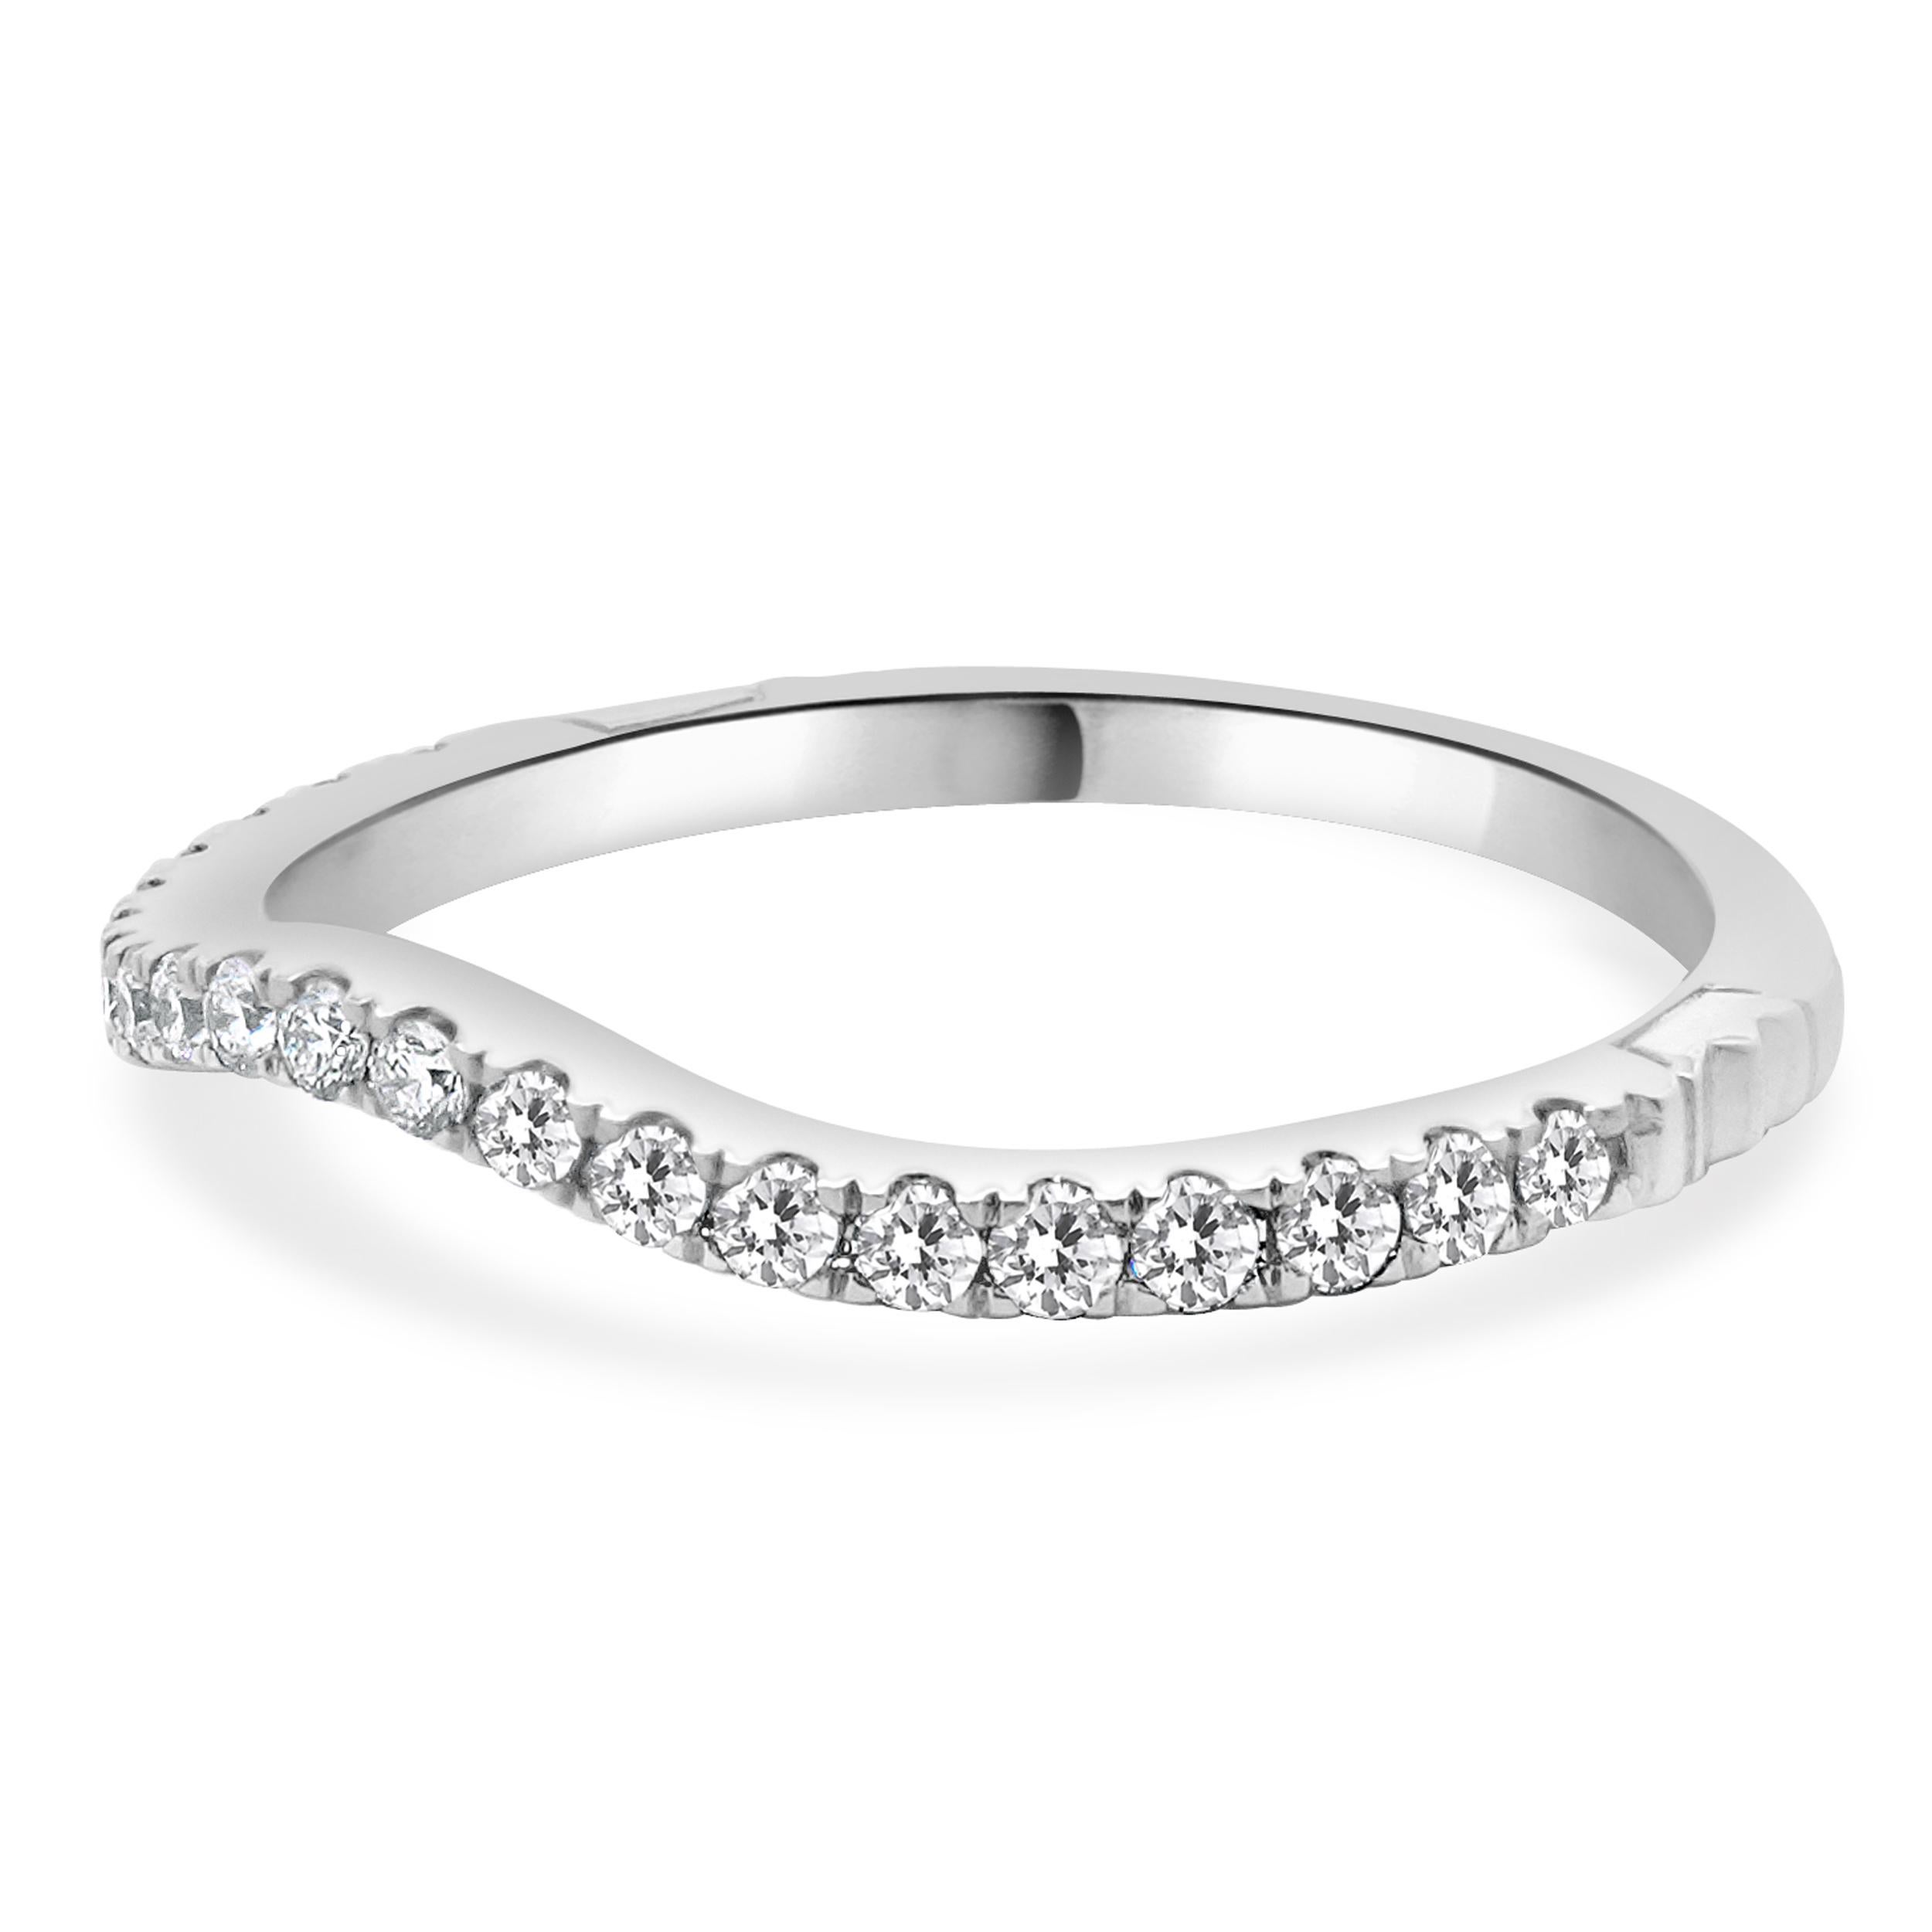 Designer: Disney
Material: 14K white gold
Diamonds: 20 round brilliant cut = 0.20cttw
Color: H
Clarity: SI1-2
Size: 5.5 sizing available 
Dimensions: rings measures 2.1mm in width
Weight: 1.64 grams